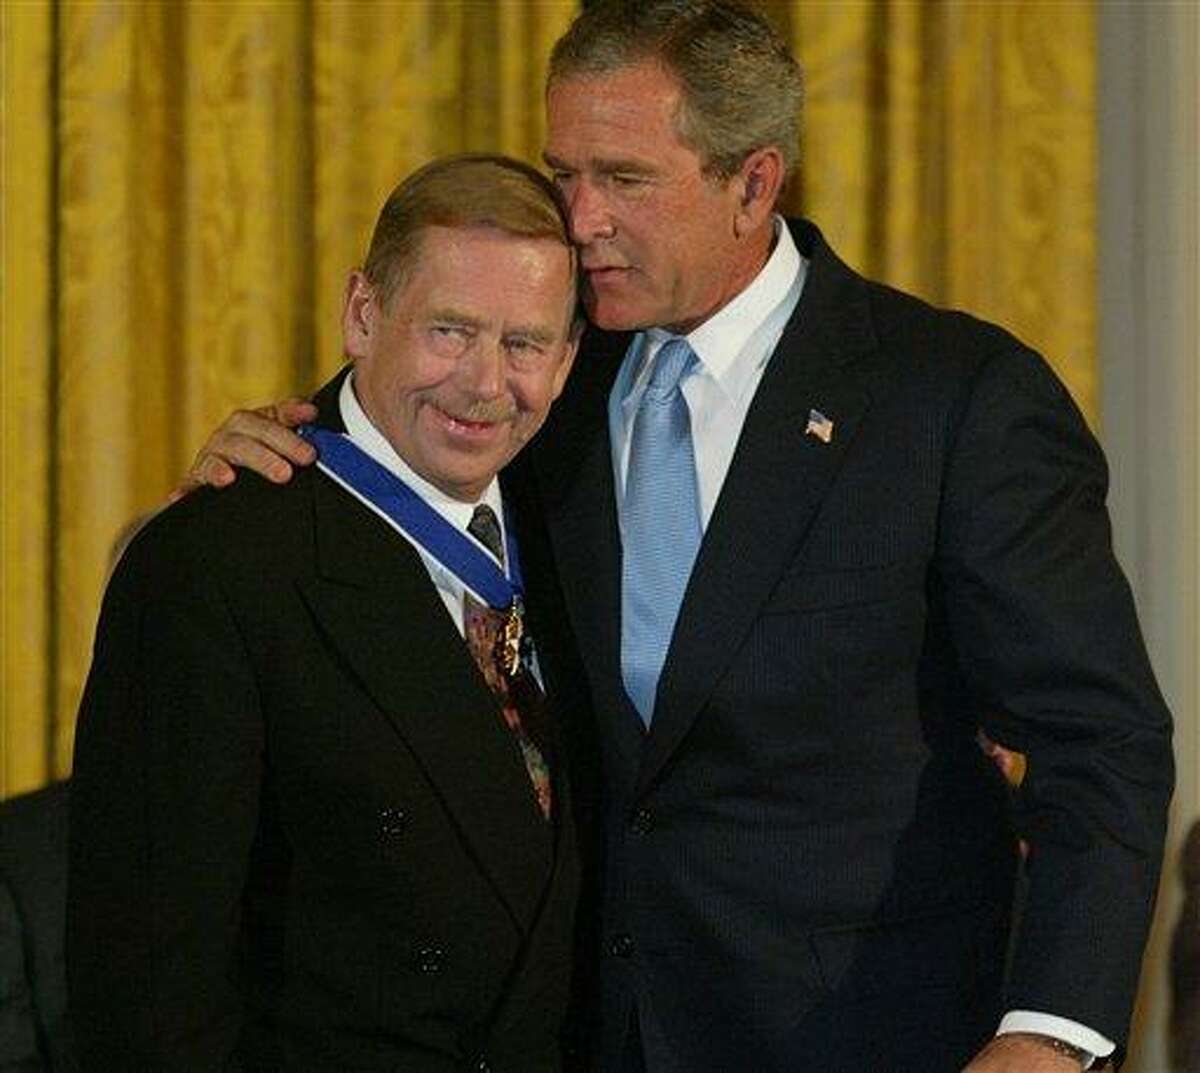 FILE - President Bush embraces Vaclav Havel, former president of the Czech Republic, after presenting him with the Presidential Medal of Freedom in the East Room of the White House in this July 23, 2003 file photo. The Presidential Medal of Freedom is the highest civilian award of the U.S. government. Havel, the dissident playwright who wove theater into politics to peacefully bring down communism in Czechoslovakia and become a hero of the epic struggle that ended the Cold War, died Sunday Dec. 18, 2011 in Prague. He was 75. (AP Photo/Charles Dharapak, File)